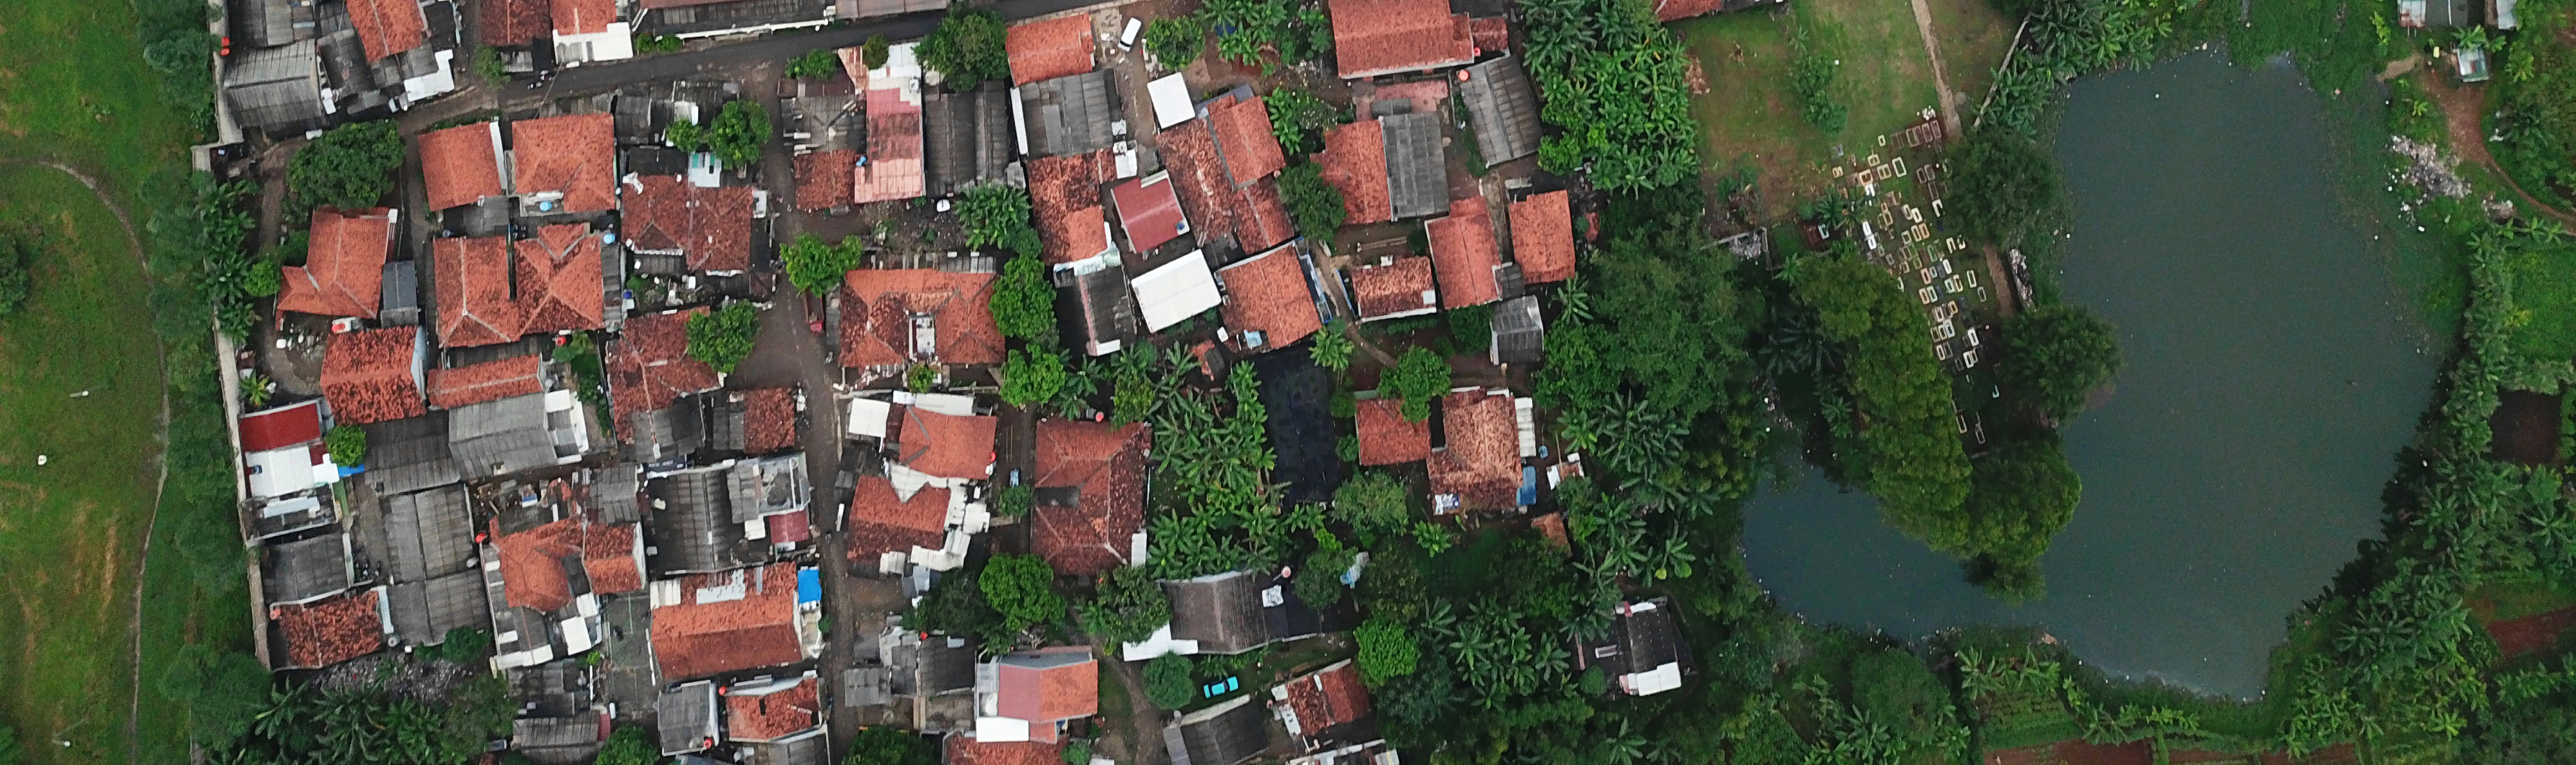 Aerial shot of houses in Indonesia.